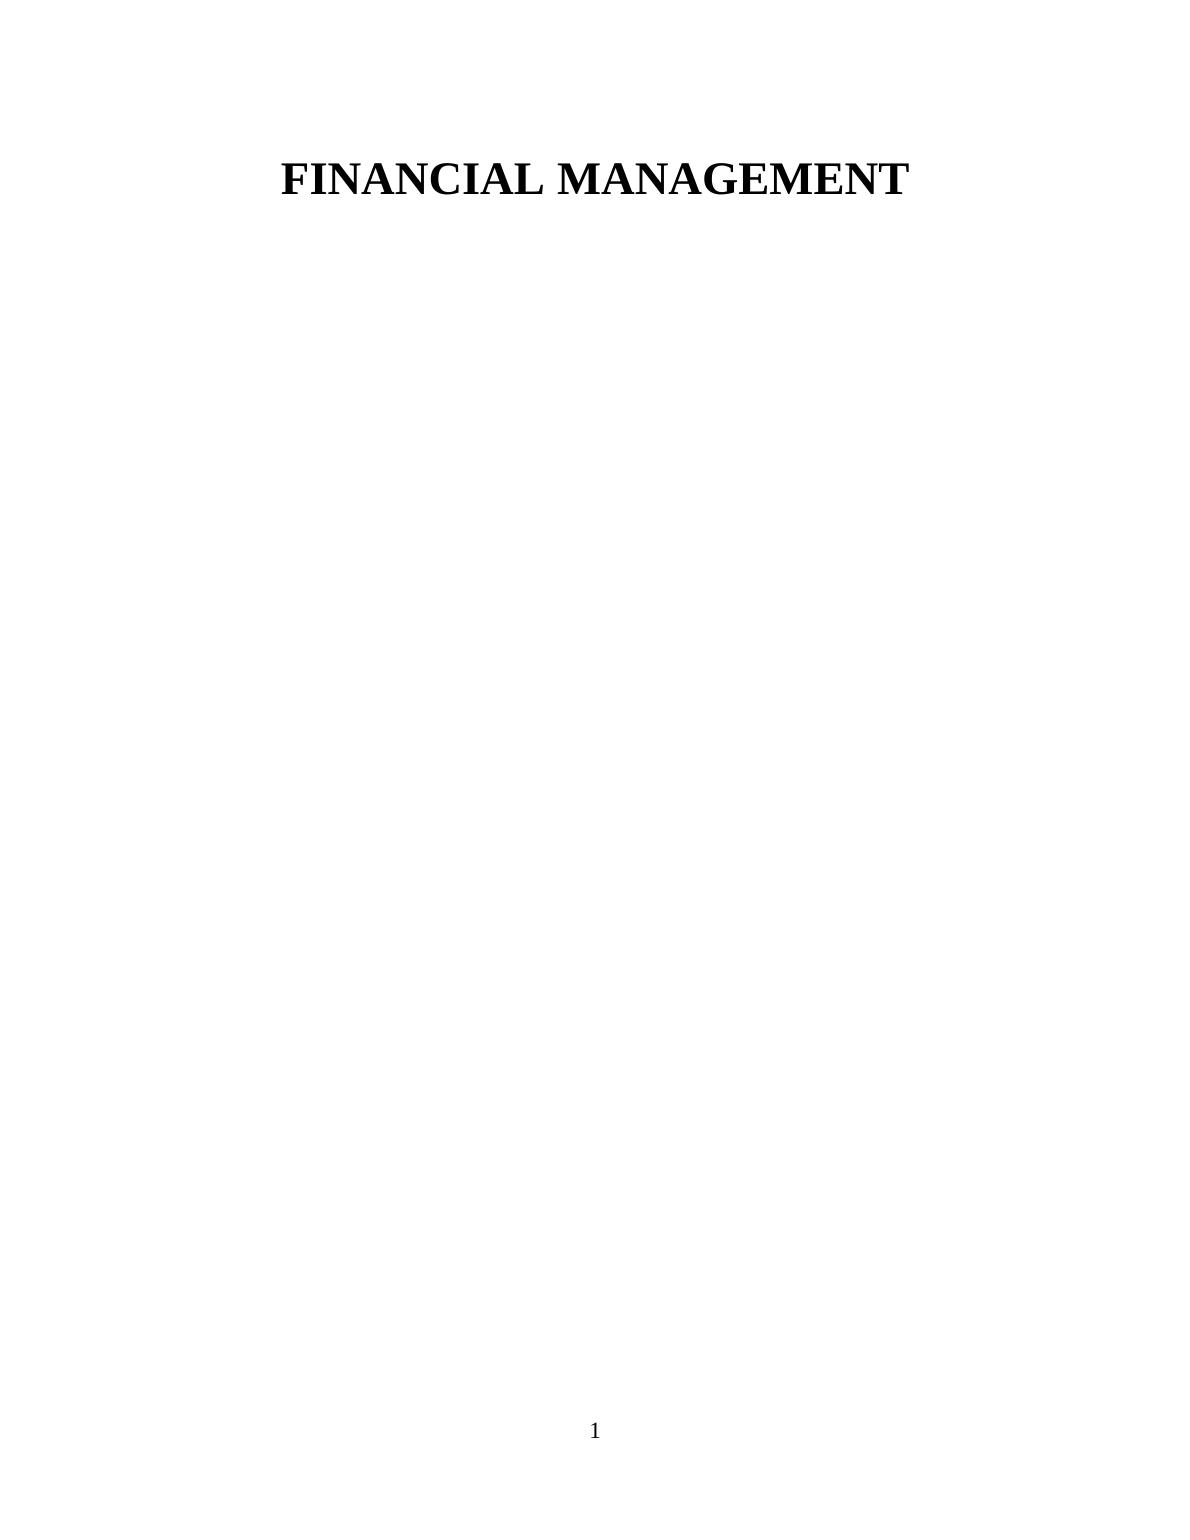 Report On Financial Management | Objectives & Implications_1